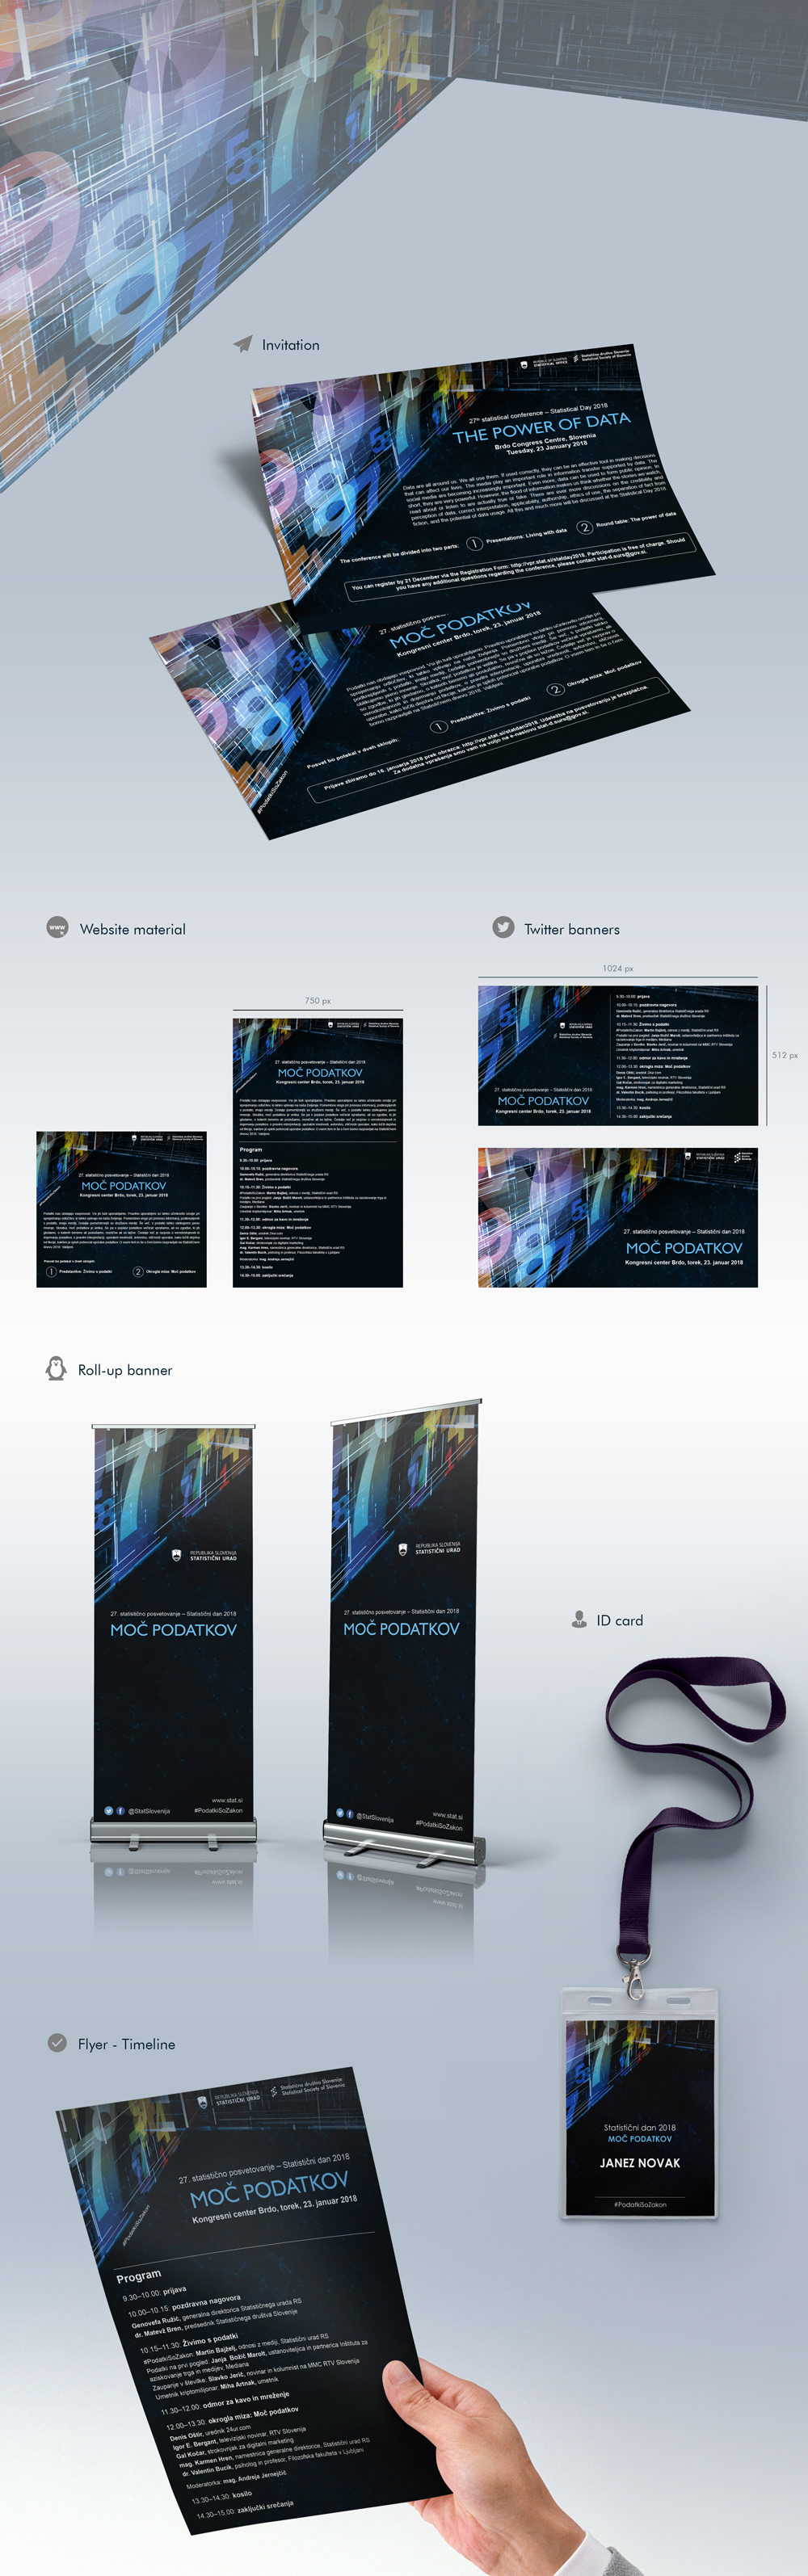 Event branding  graphic design creative direction art business Government statistical day